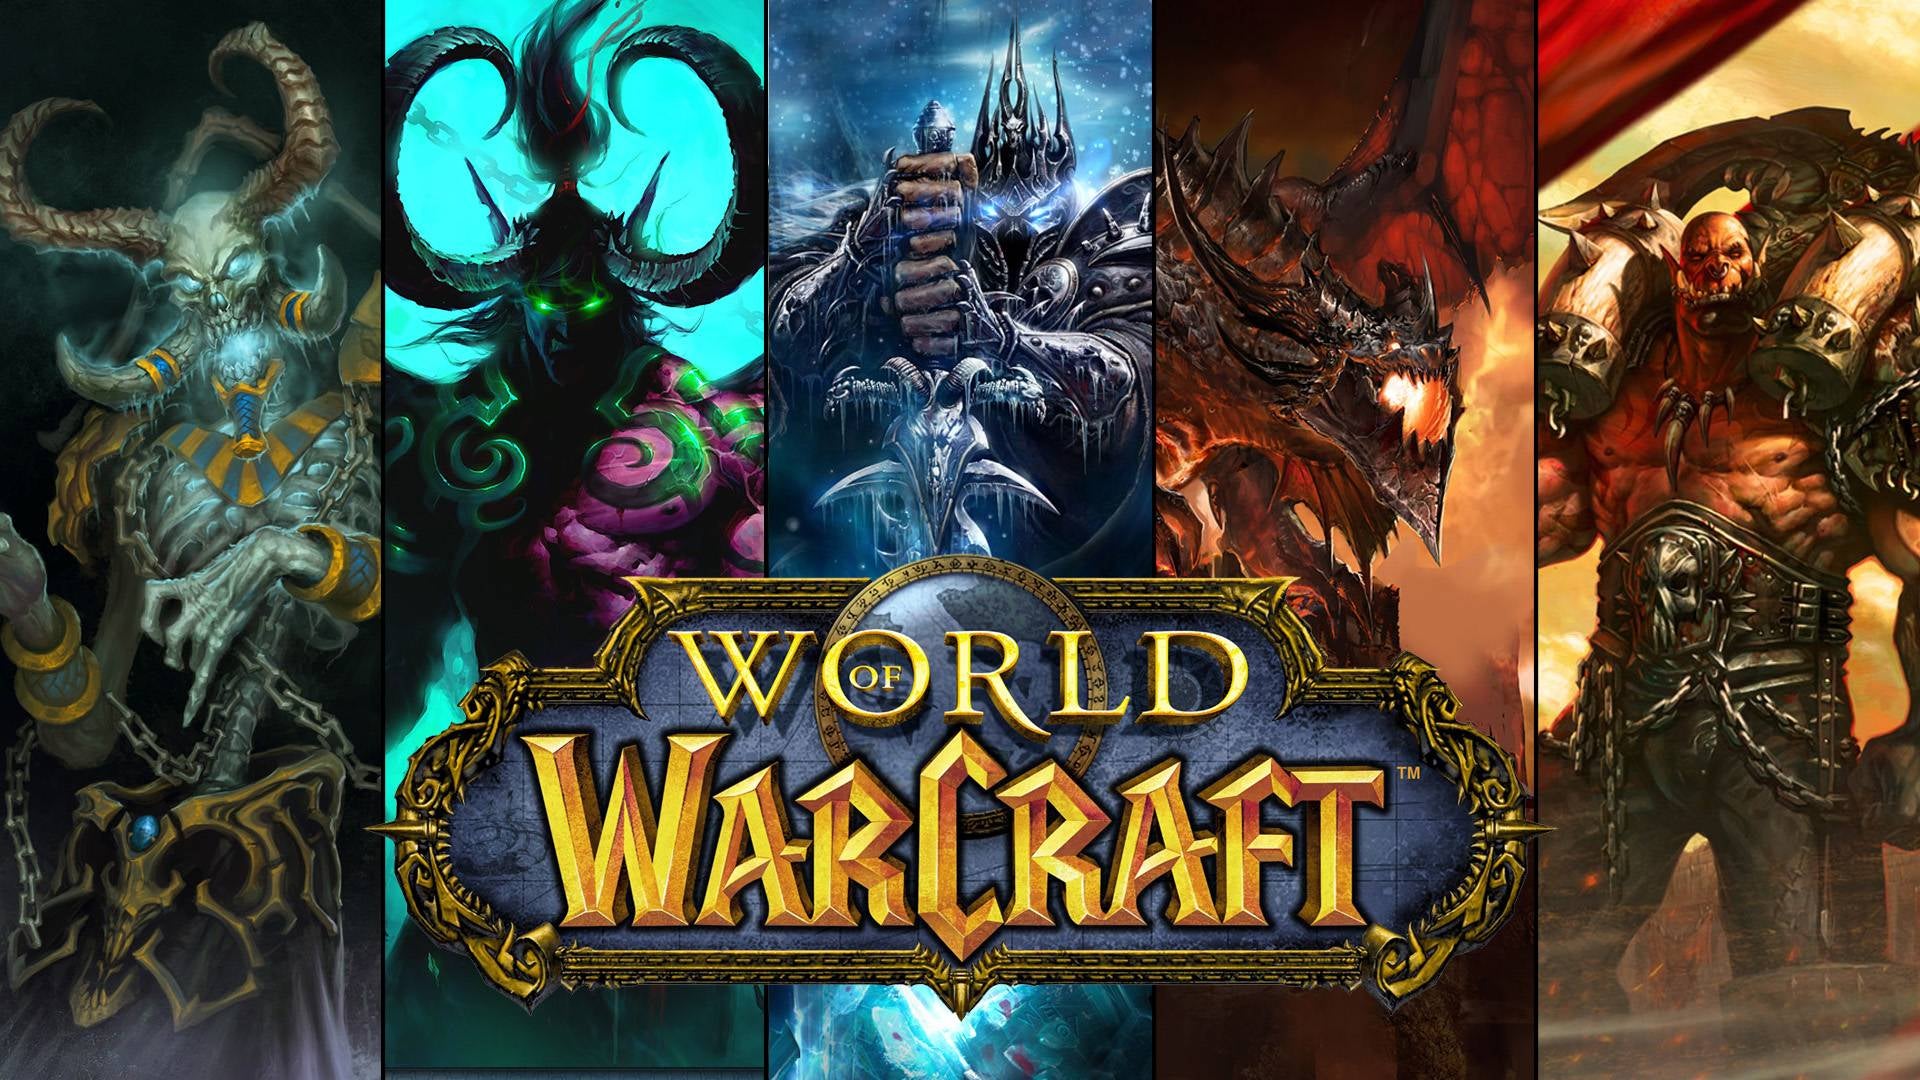 Image for World of Warcraft removing Twitter functionality - News-in-brief